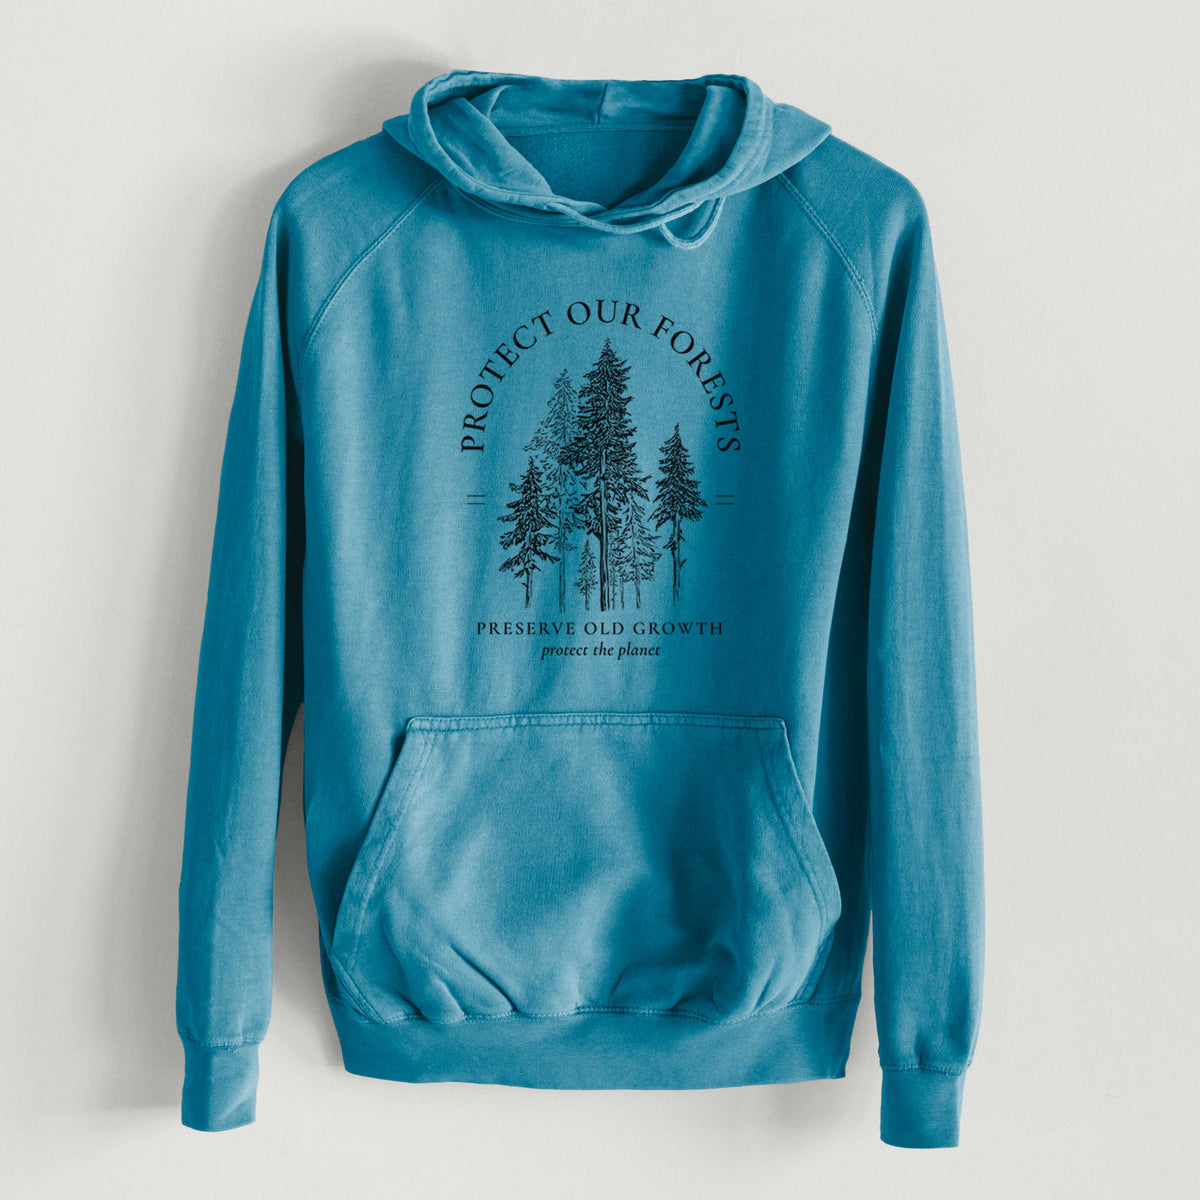 Protect our Forests - Preserve Old Growth  - Mid-Weight Unisex Vintage 100% Cotton Hoodie